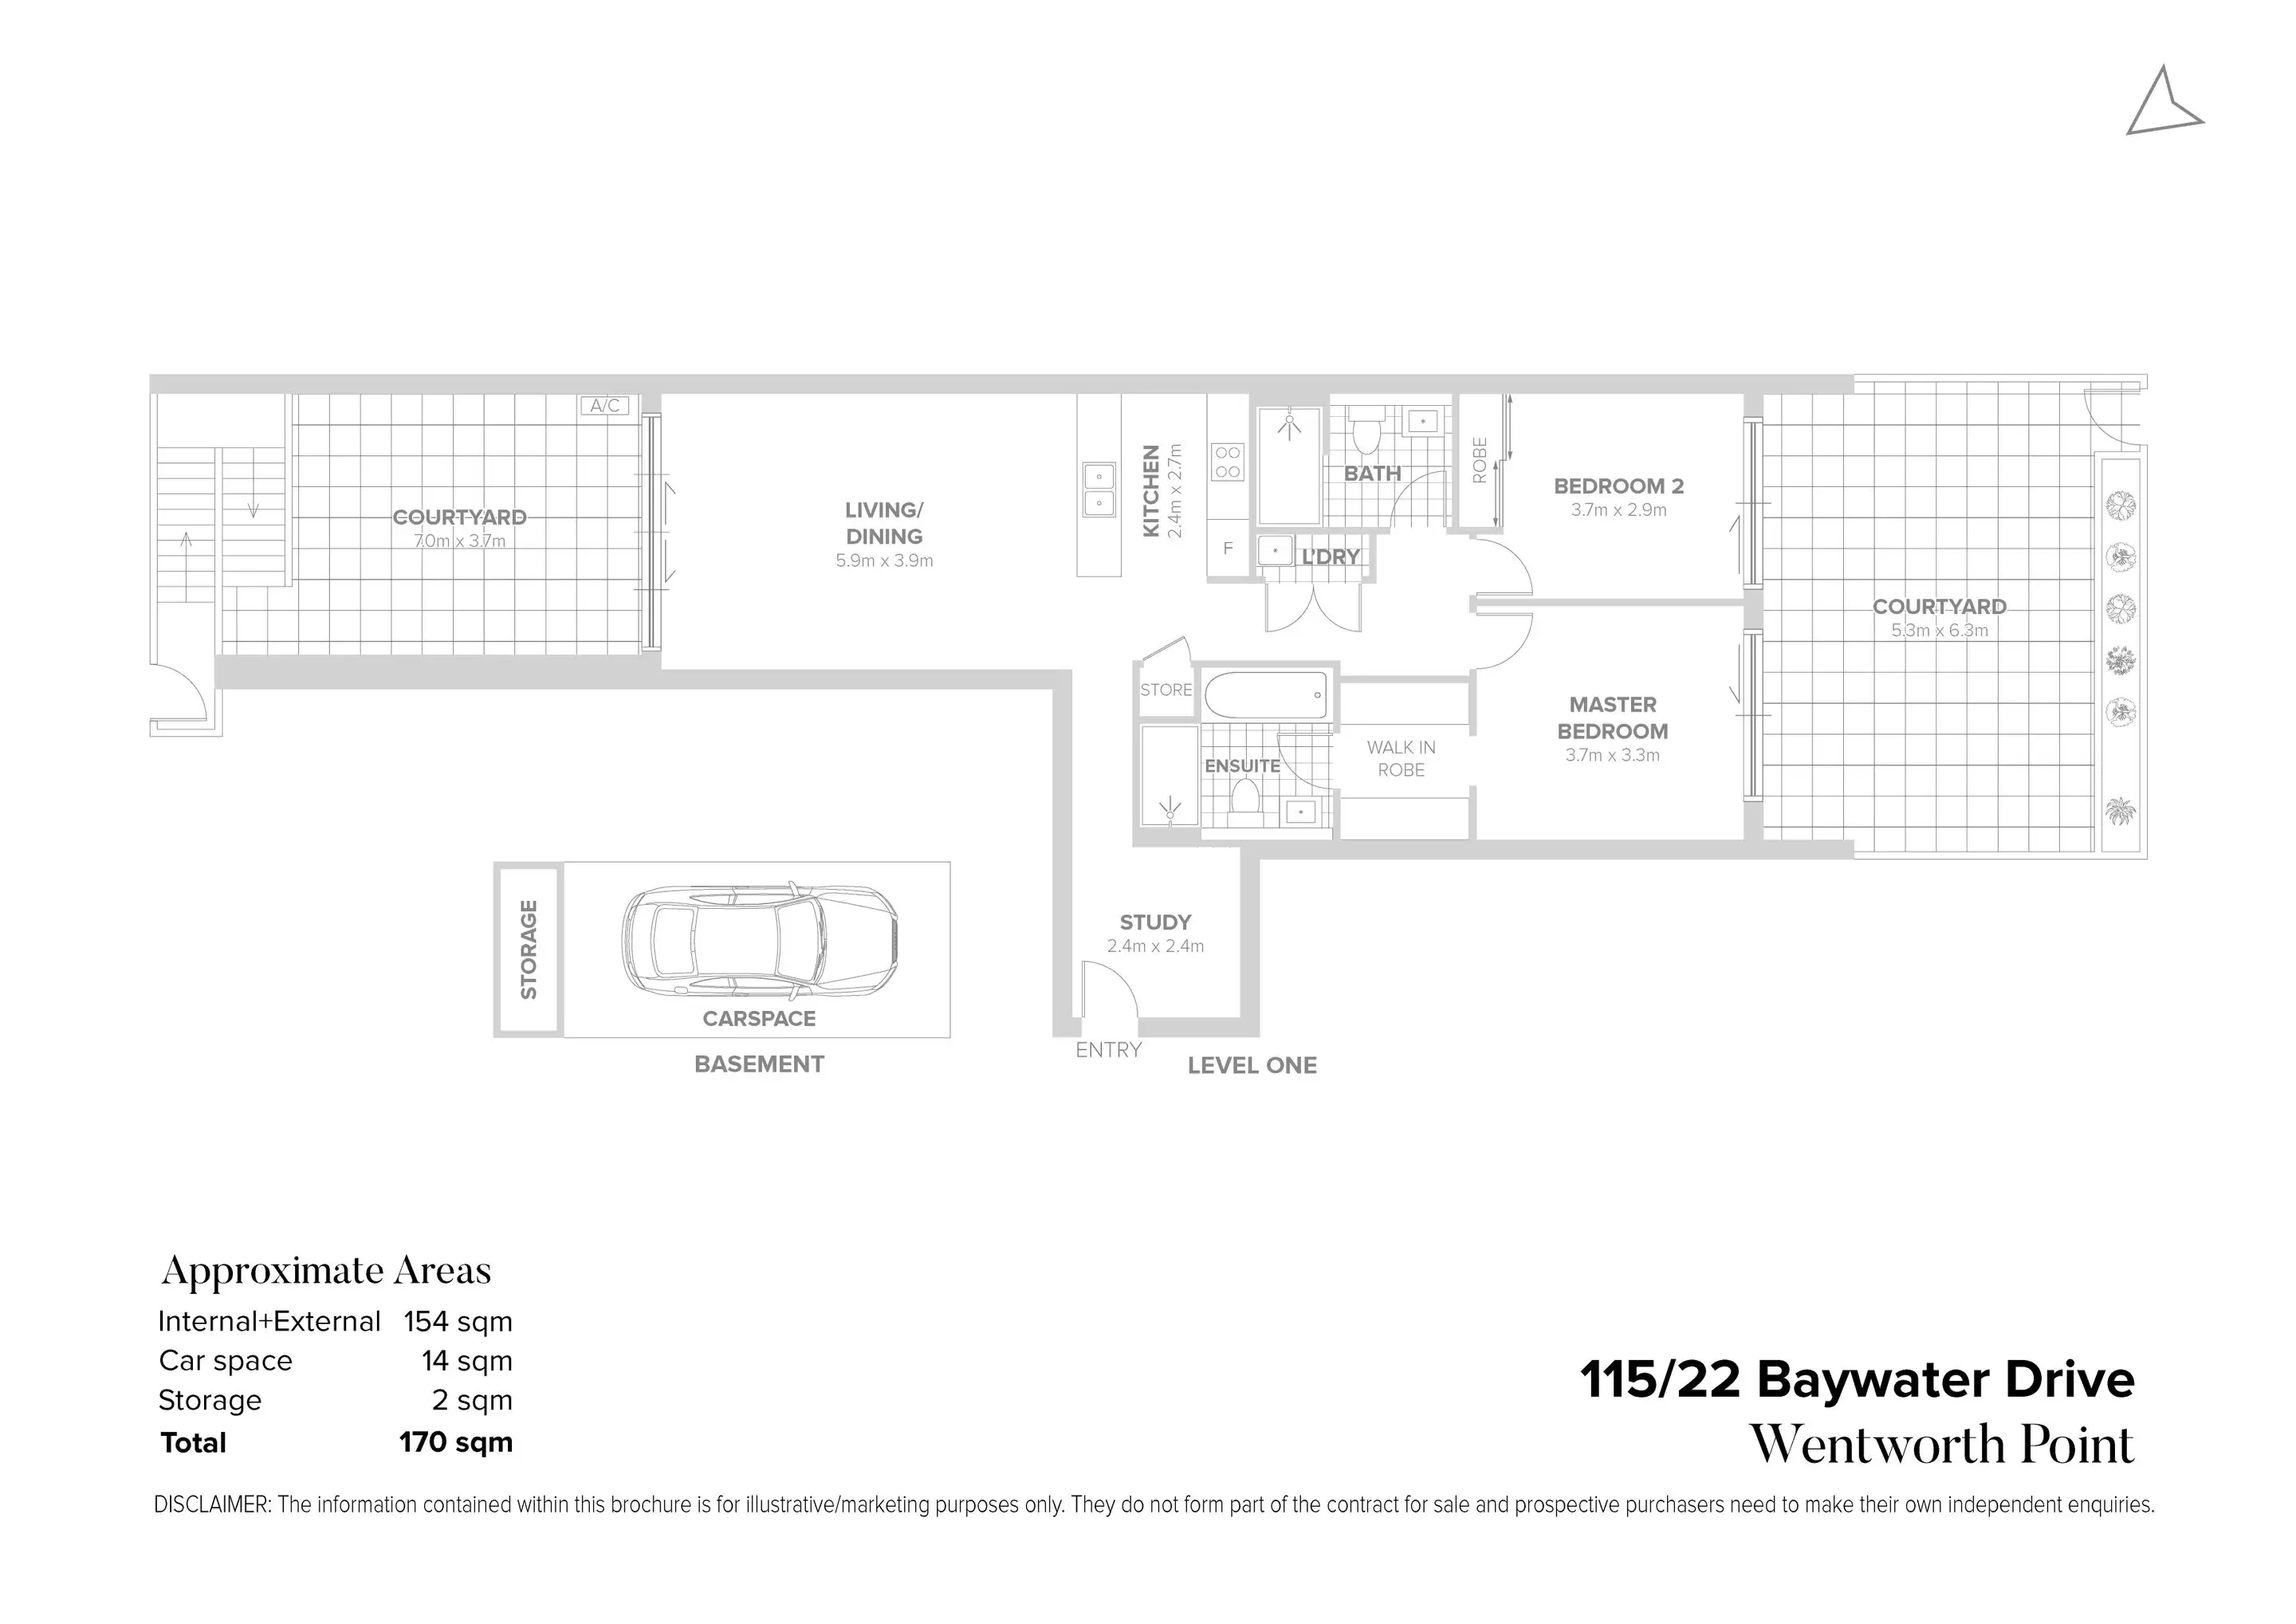 115/22 Baywater Drive, Wentworth Point Sold by Chidiac Realty - floorplan